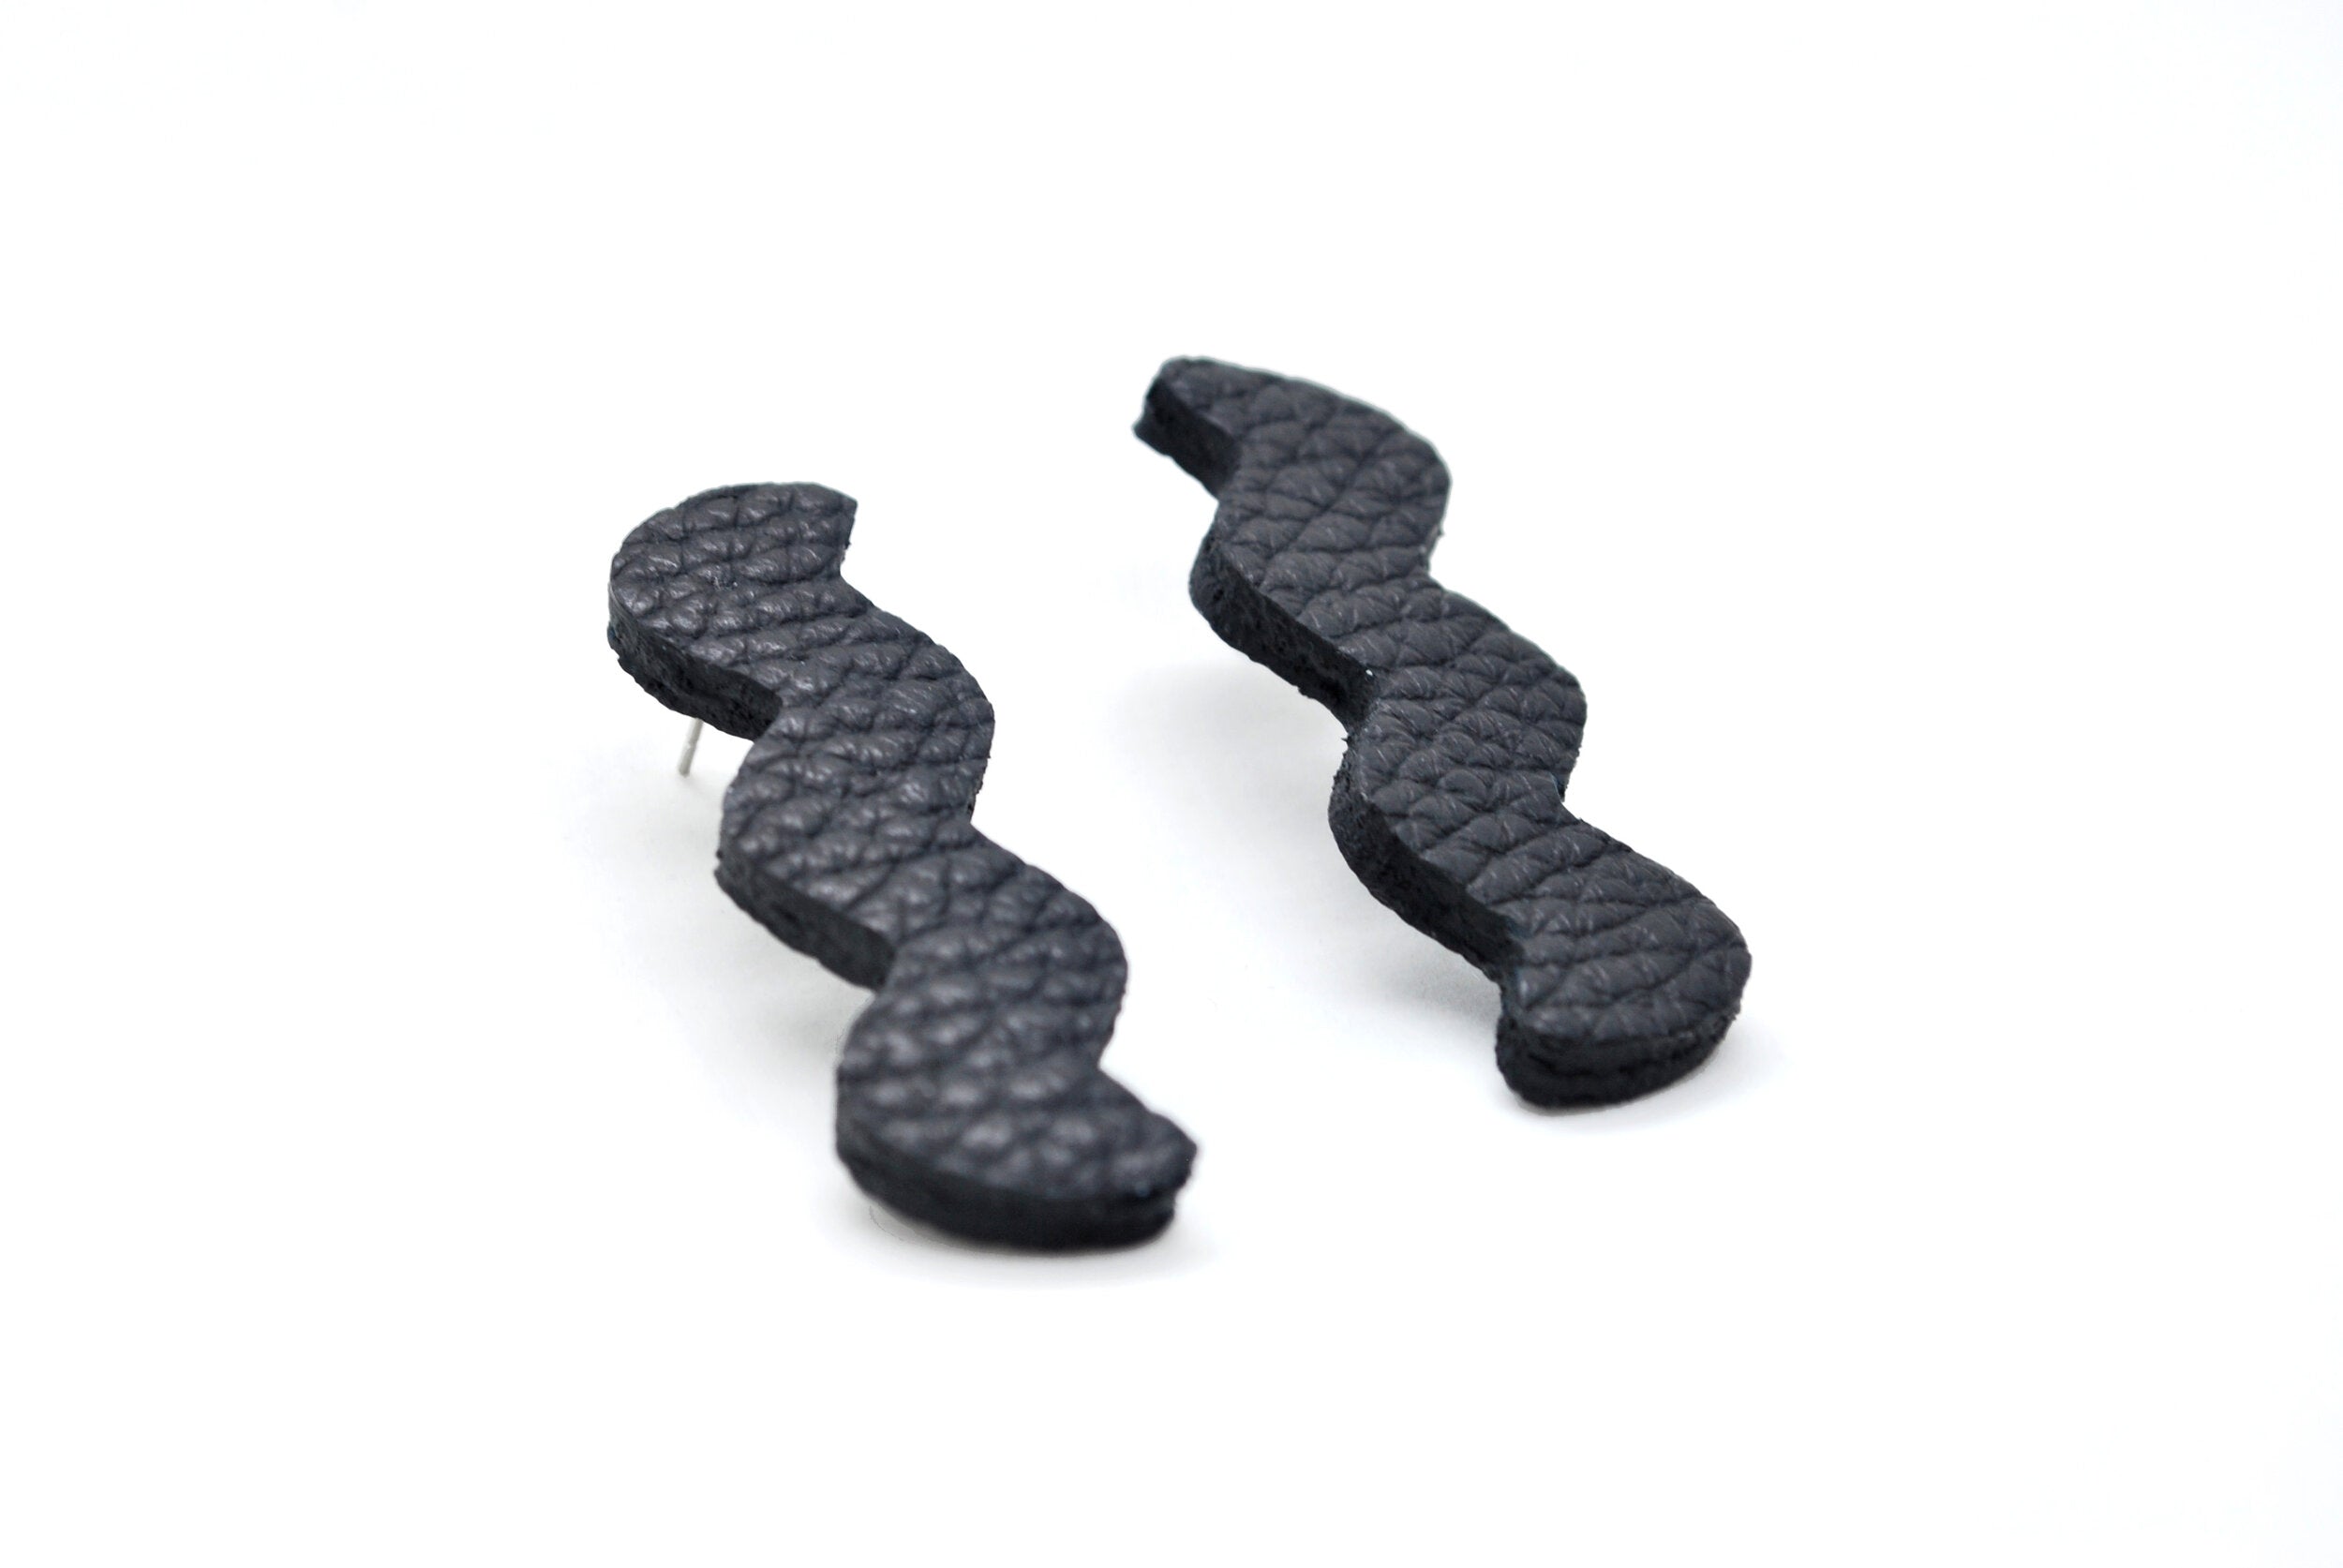 memphis style modern art earrings in textured leather.